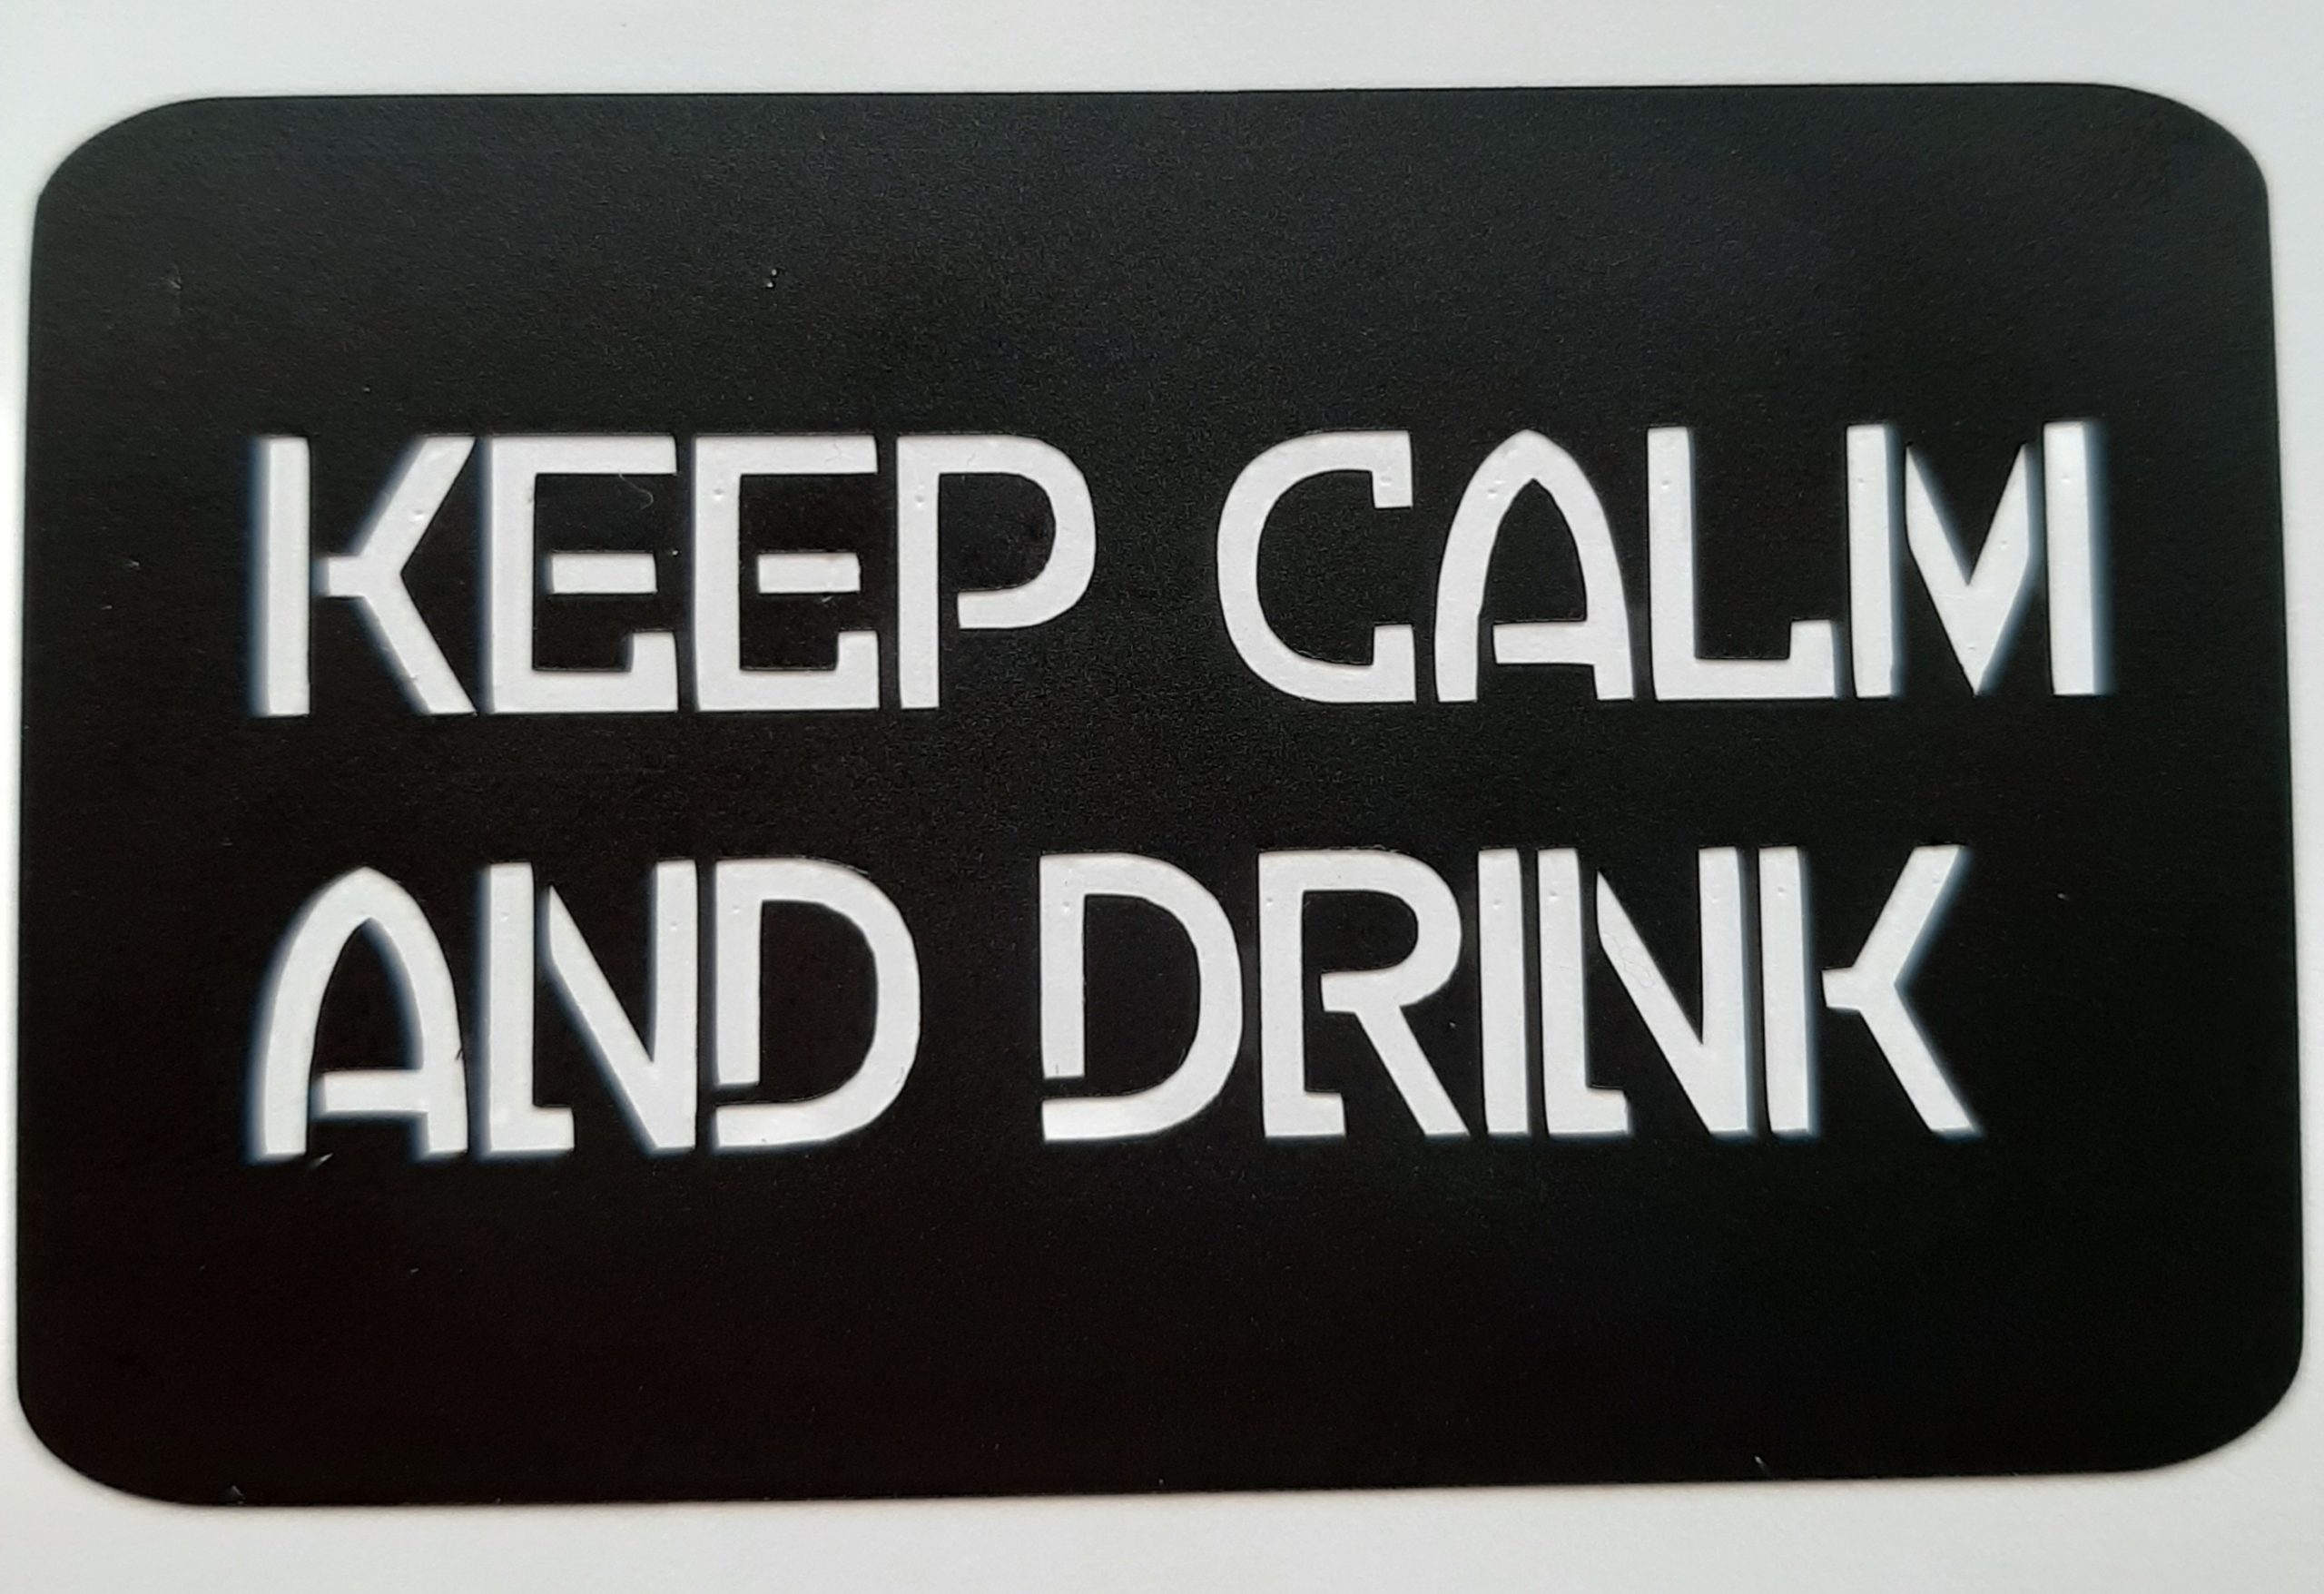 keep calm and drink